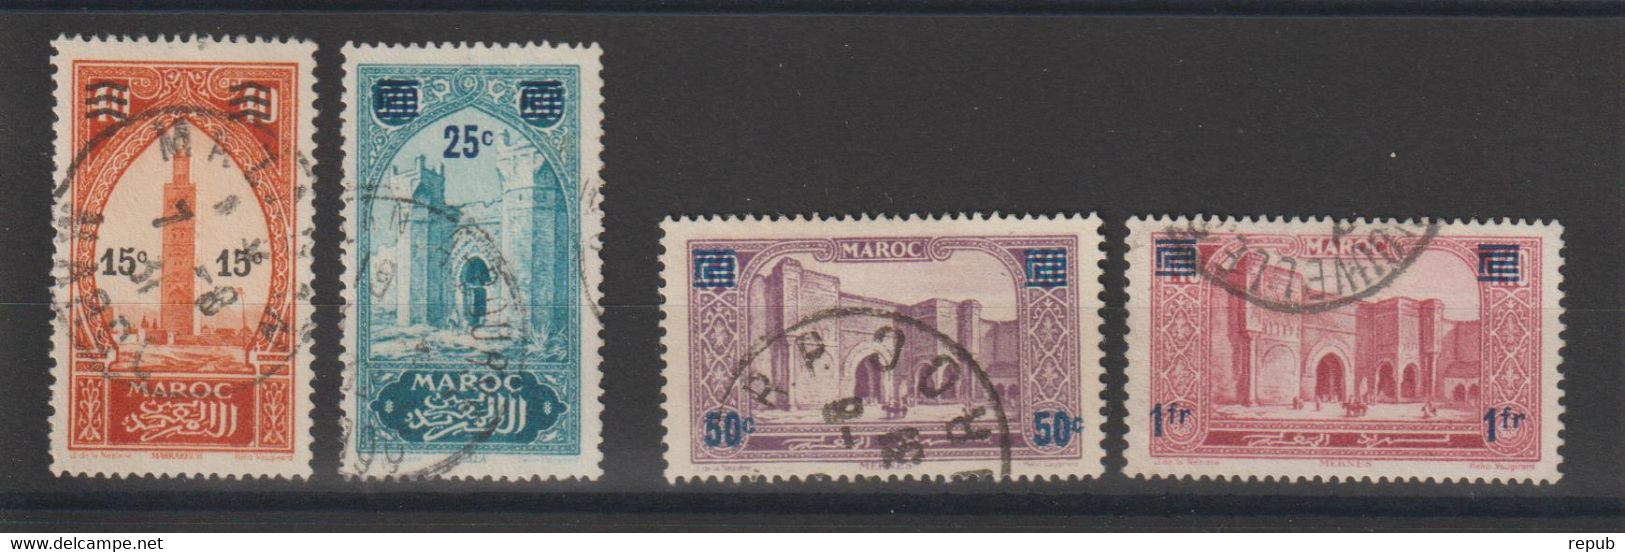 Maroc 1930-31 Série Sites Surchargée 124-127 4 Val Oblit. Used - Used Stamps